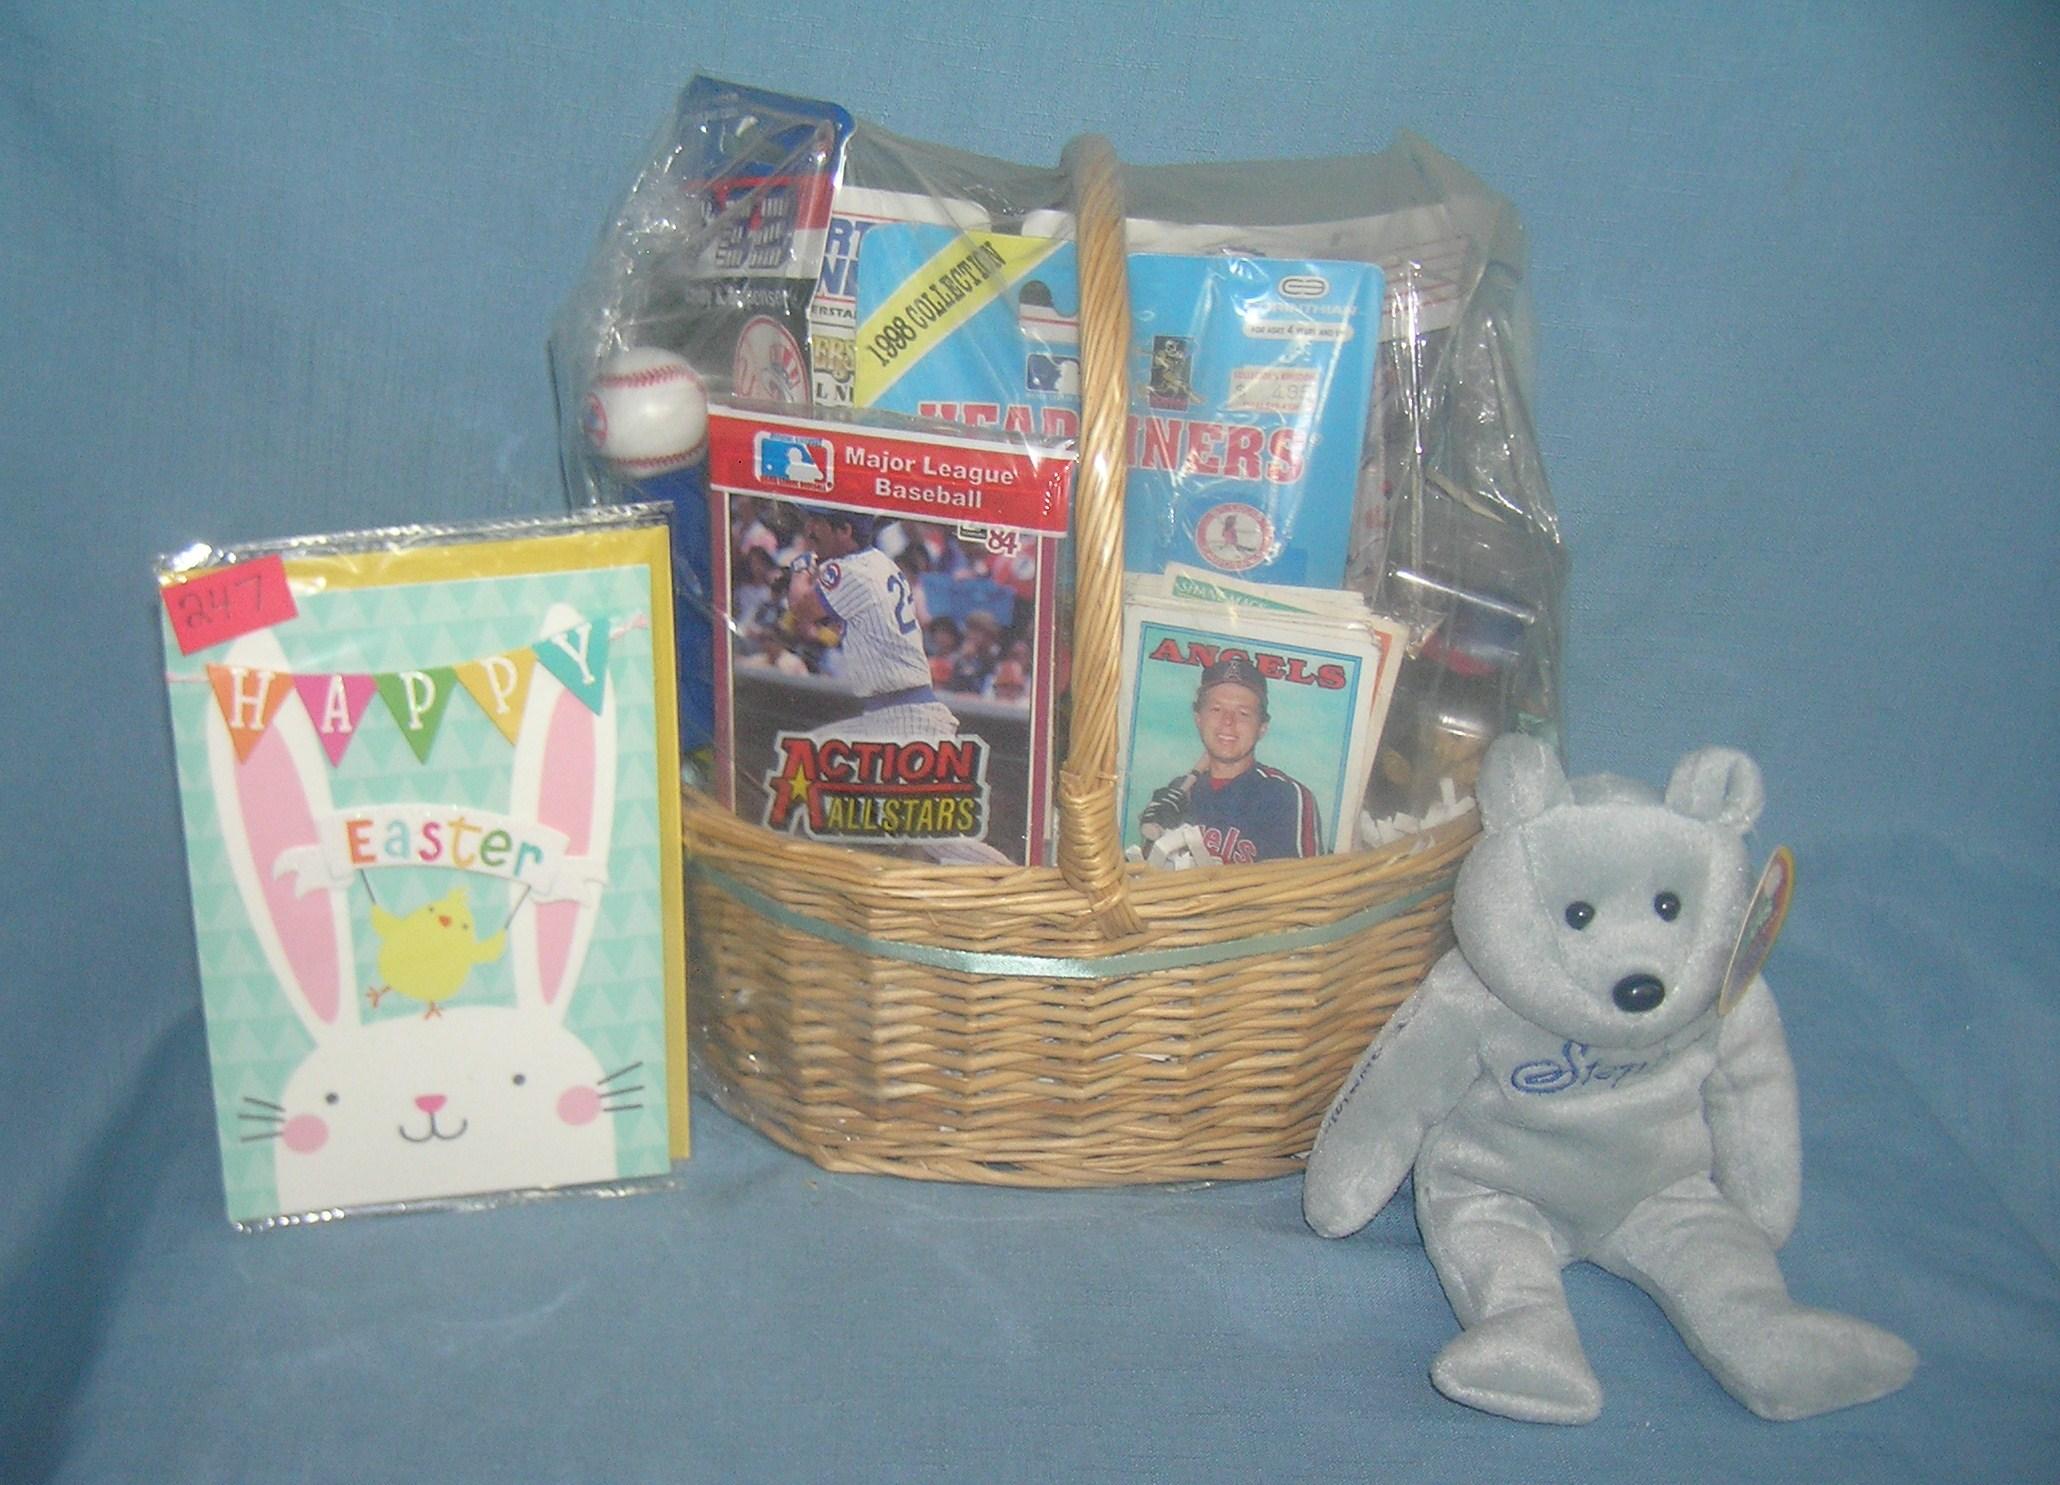 Sports collectibles themed gift basket, loaded